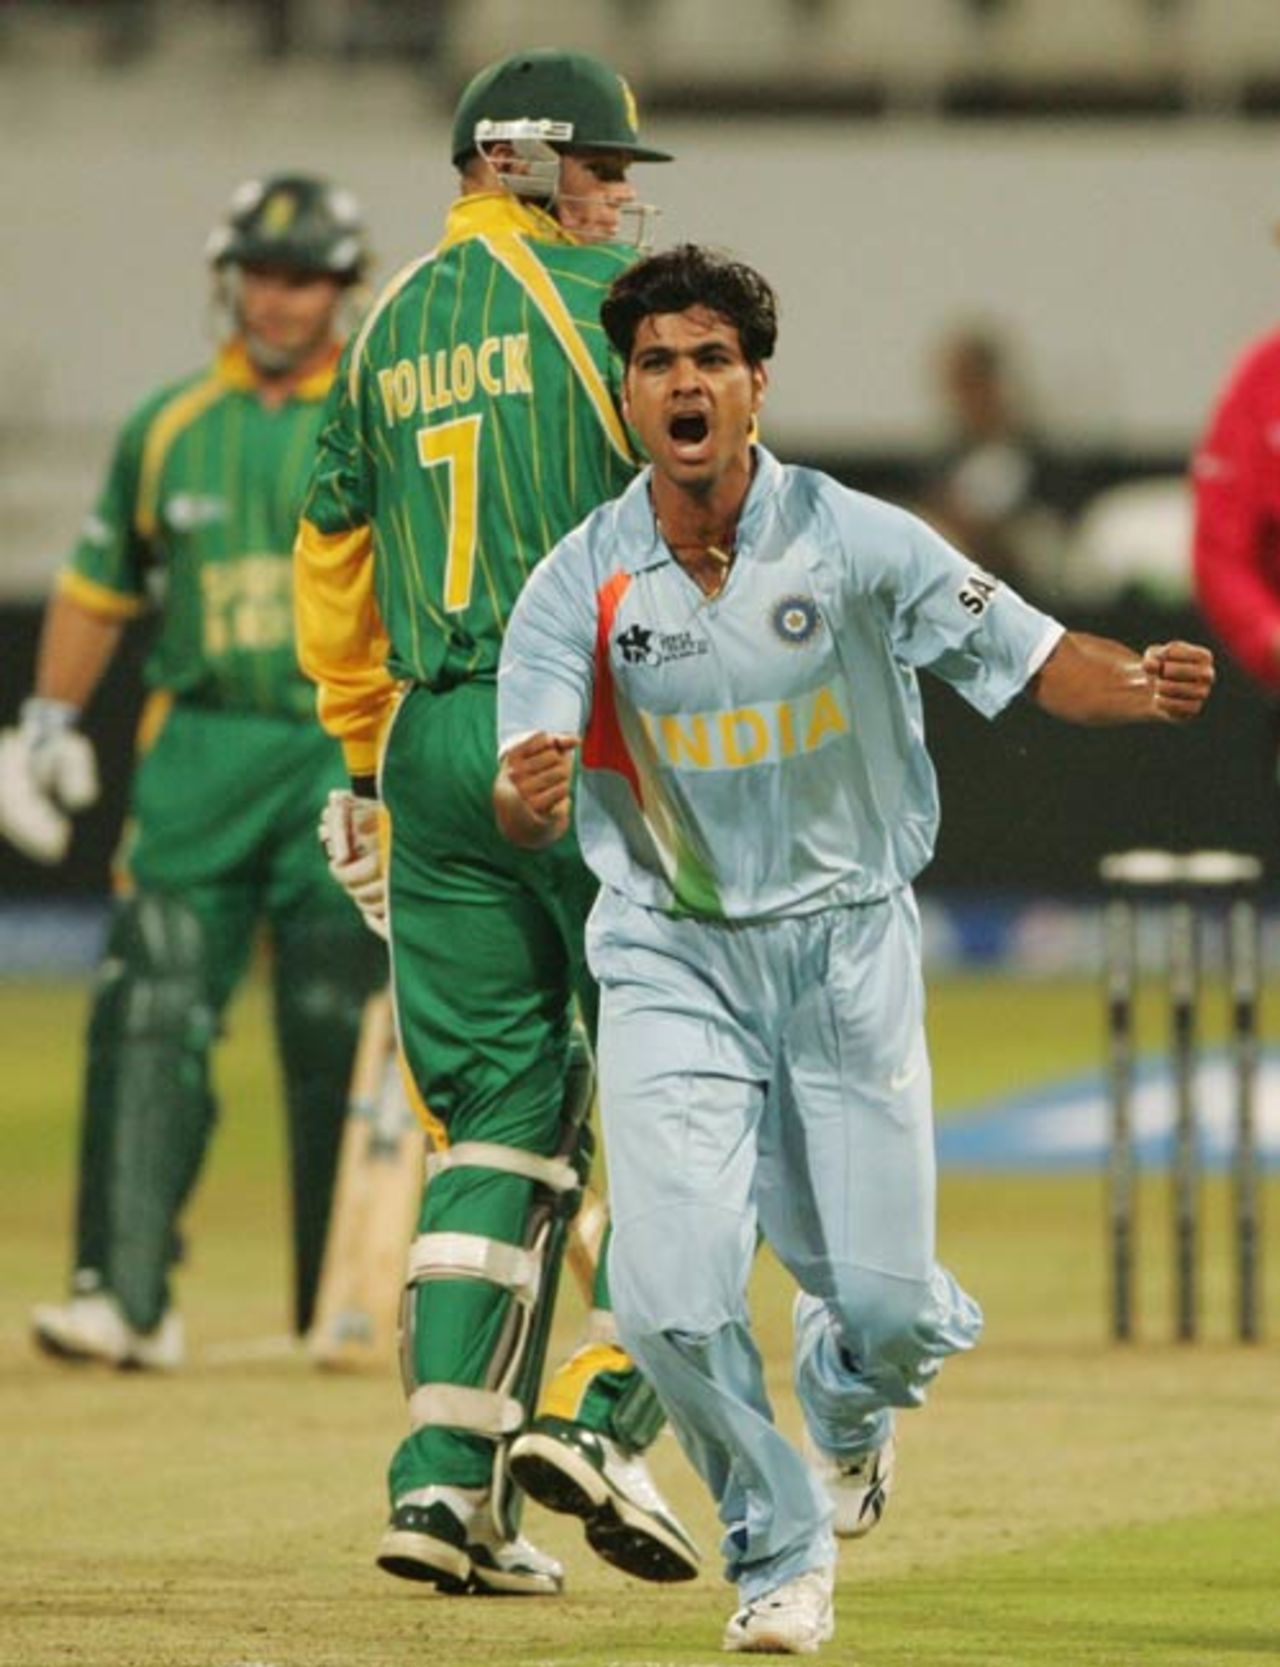 RP Singh is pumped up after dismissing Shaun Pollock, India v South Africa, Group E, ICC World Twenty20, Durban, September 20, 2007